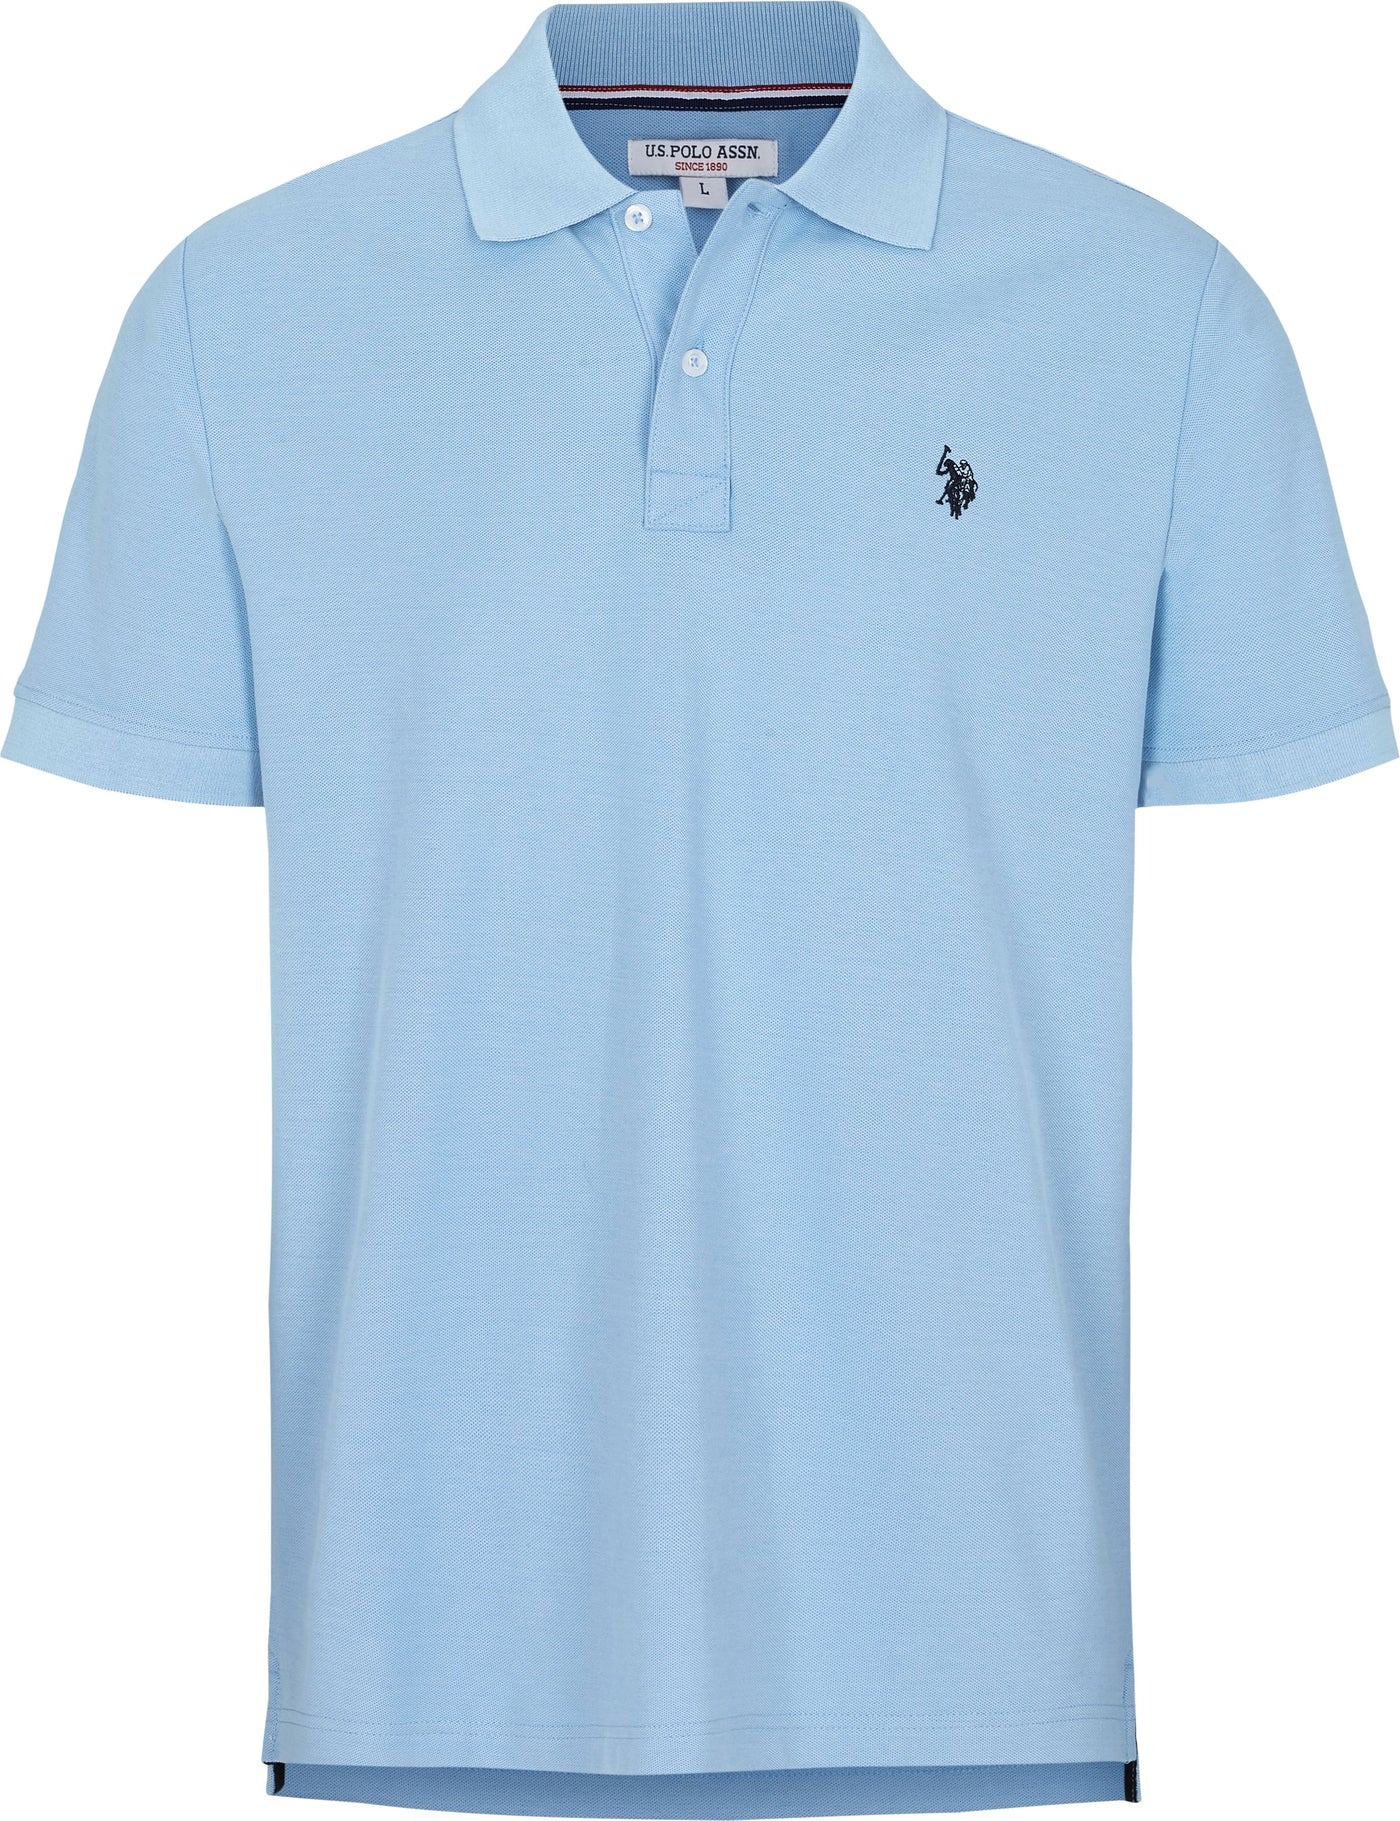 Polo 'Alfred' - Placid Blue